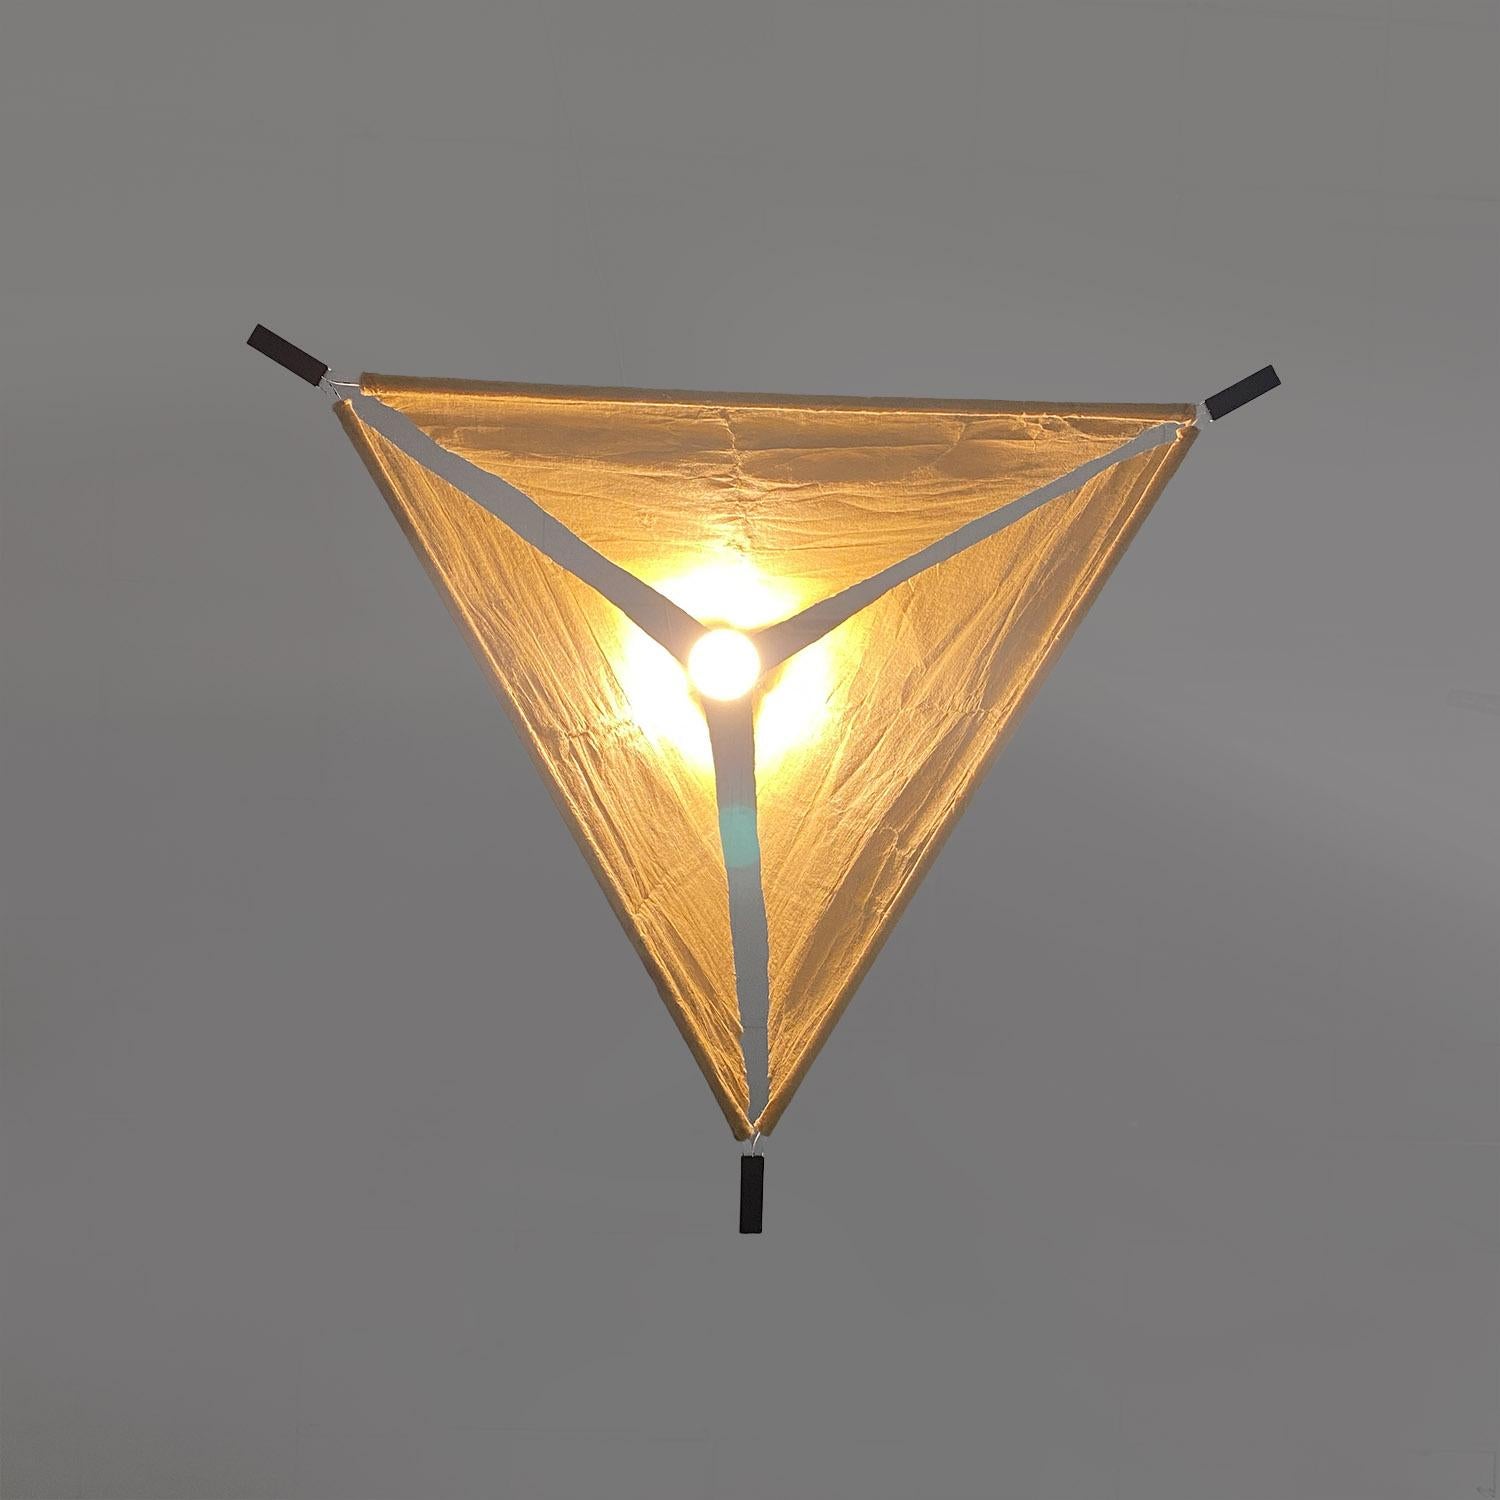 Italian mid-century modern pyramid metal and parchment chandelier, 1960s For Sale 2